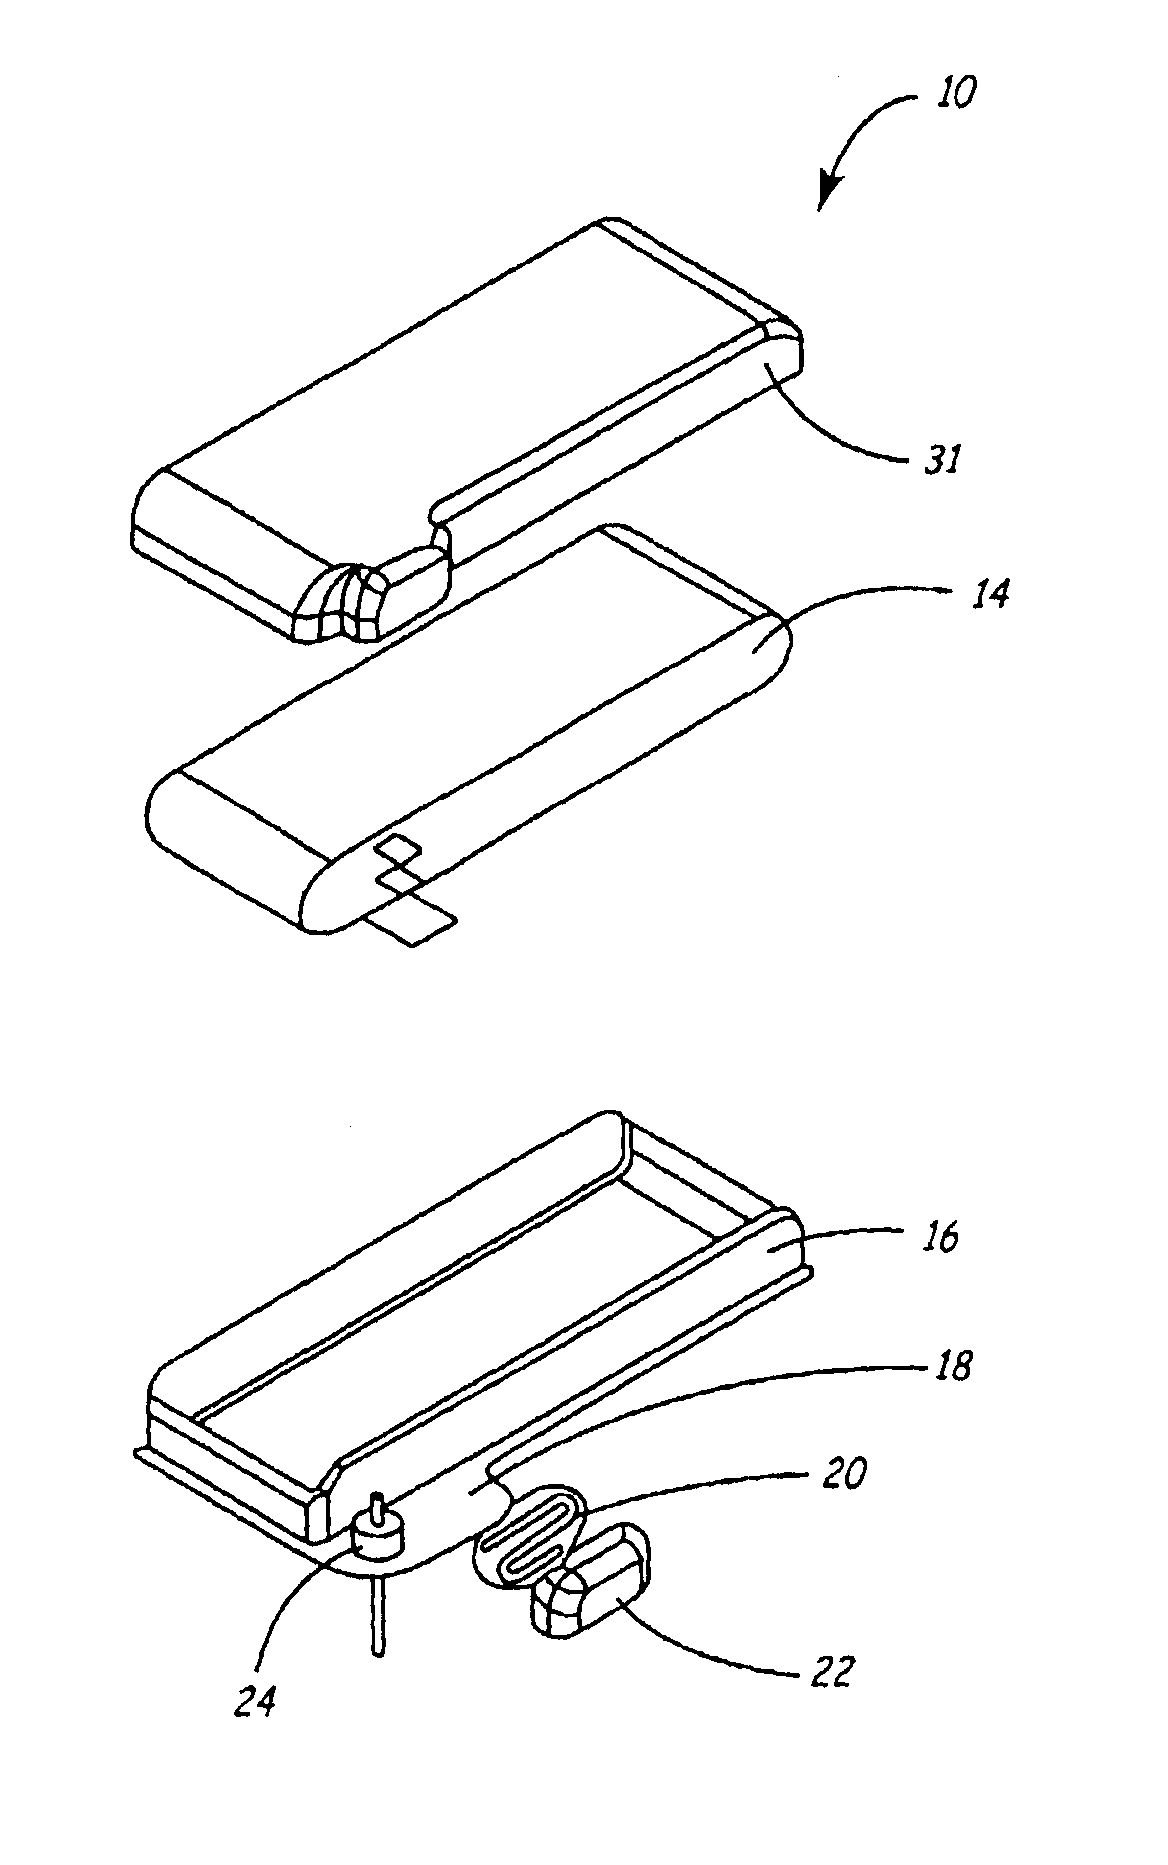 Contoured battery for implantable medical devices and method of manufacture